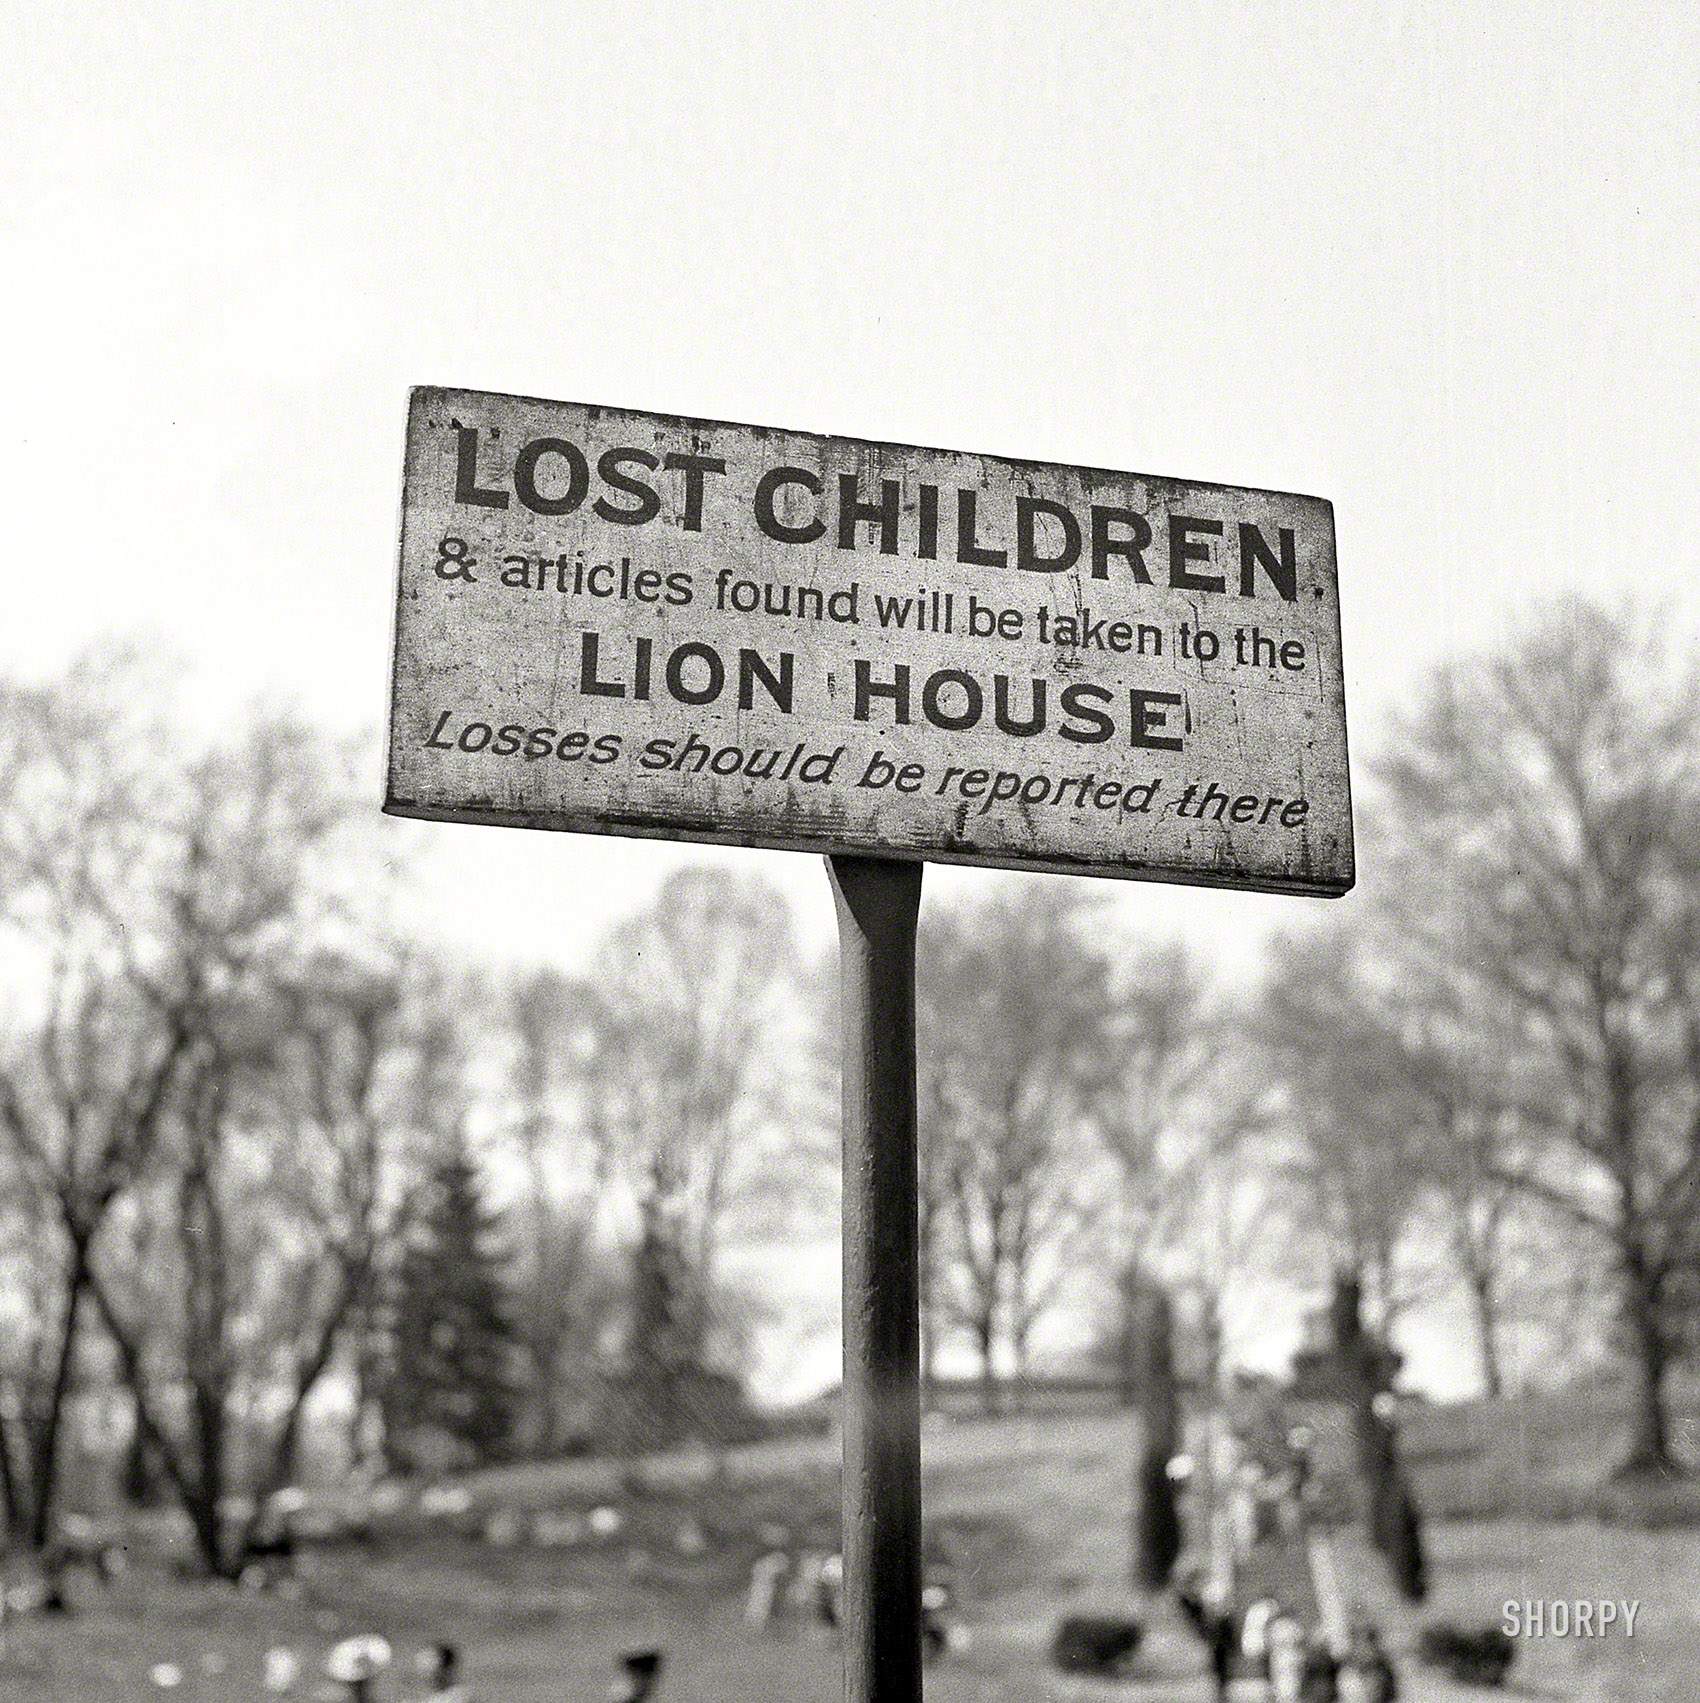 Yes, Billy was lost. But he was also plump and juicy!
May 1943. "Washington, D.C. A sign at the National Zoological Park." Photo by Esther Bubley for the Office of War Information. View full size.